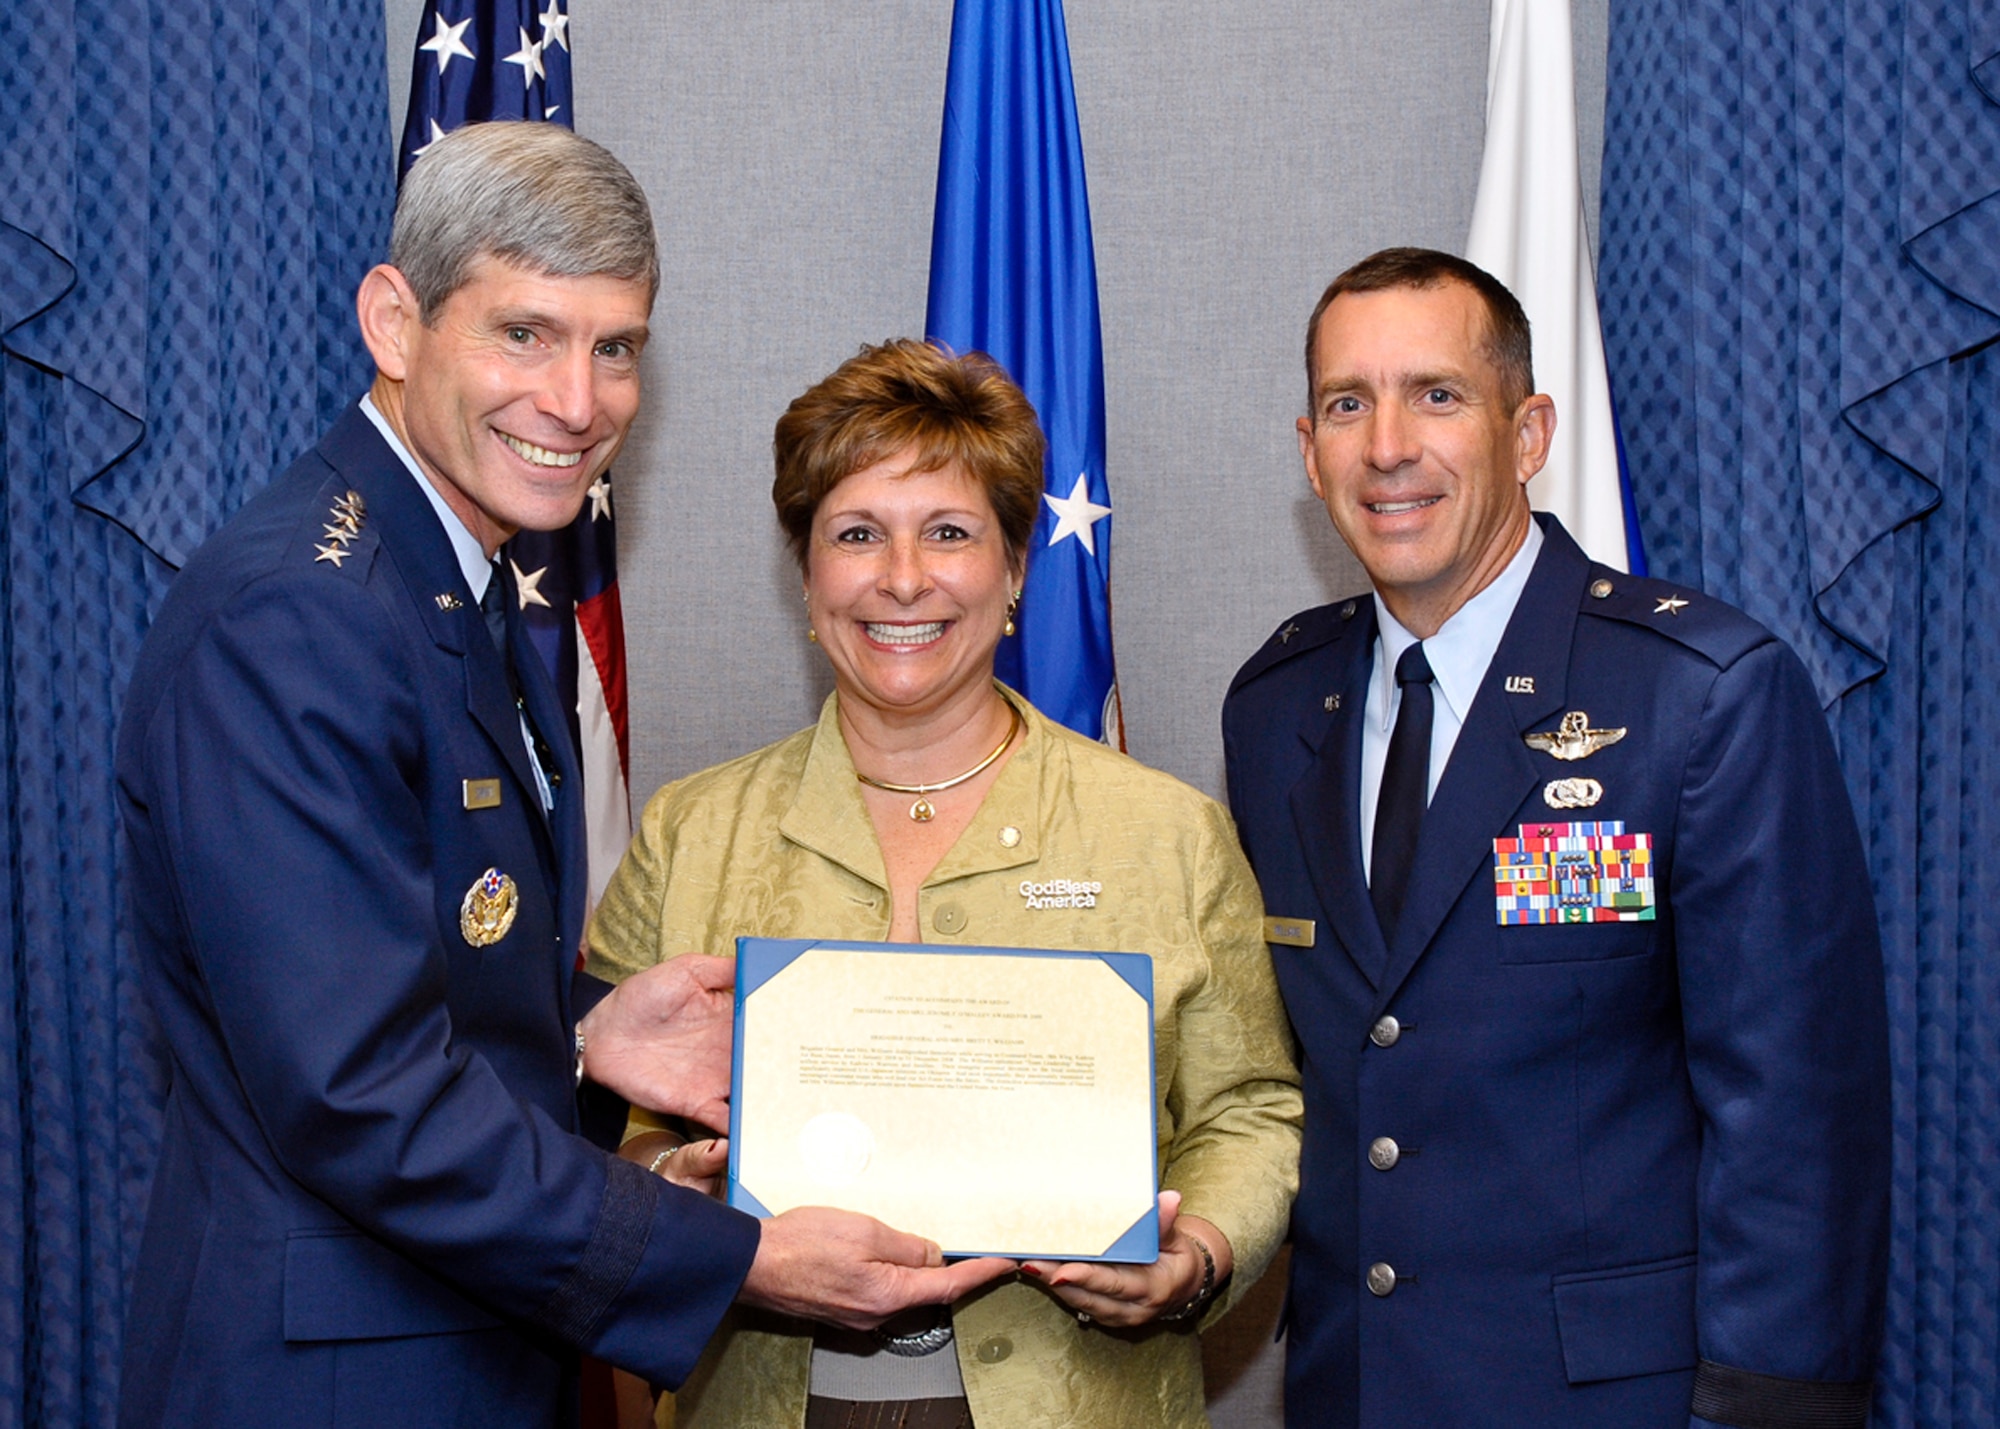 Air Force Chief of Staff Gen. Norton Schwartz presents the 2009 General and Mrs. Jerome F. O'Malley Award to Brig. Gen. Brett and Marianne Williams at a Pentagon ceremony Sept. 11, 2009.  (U.S. Air Force photo/Michael J Pausic)